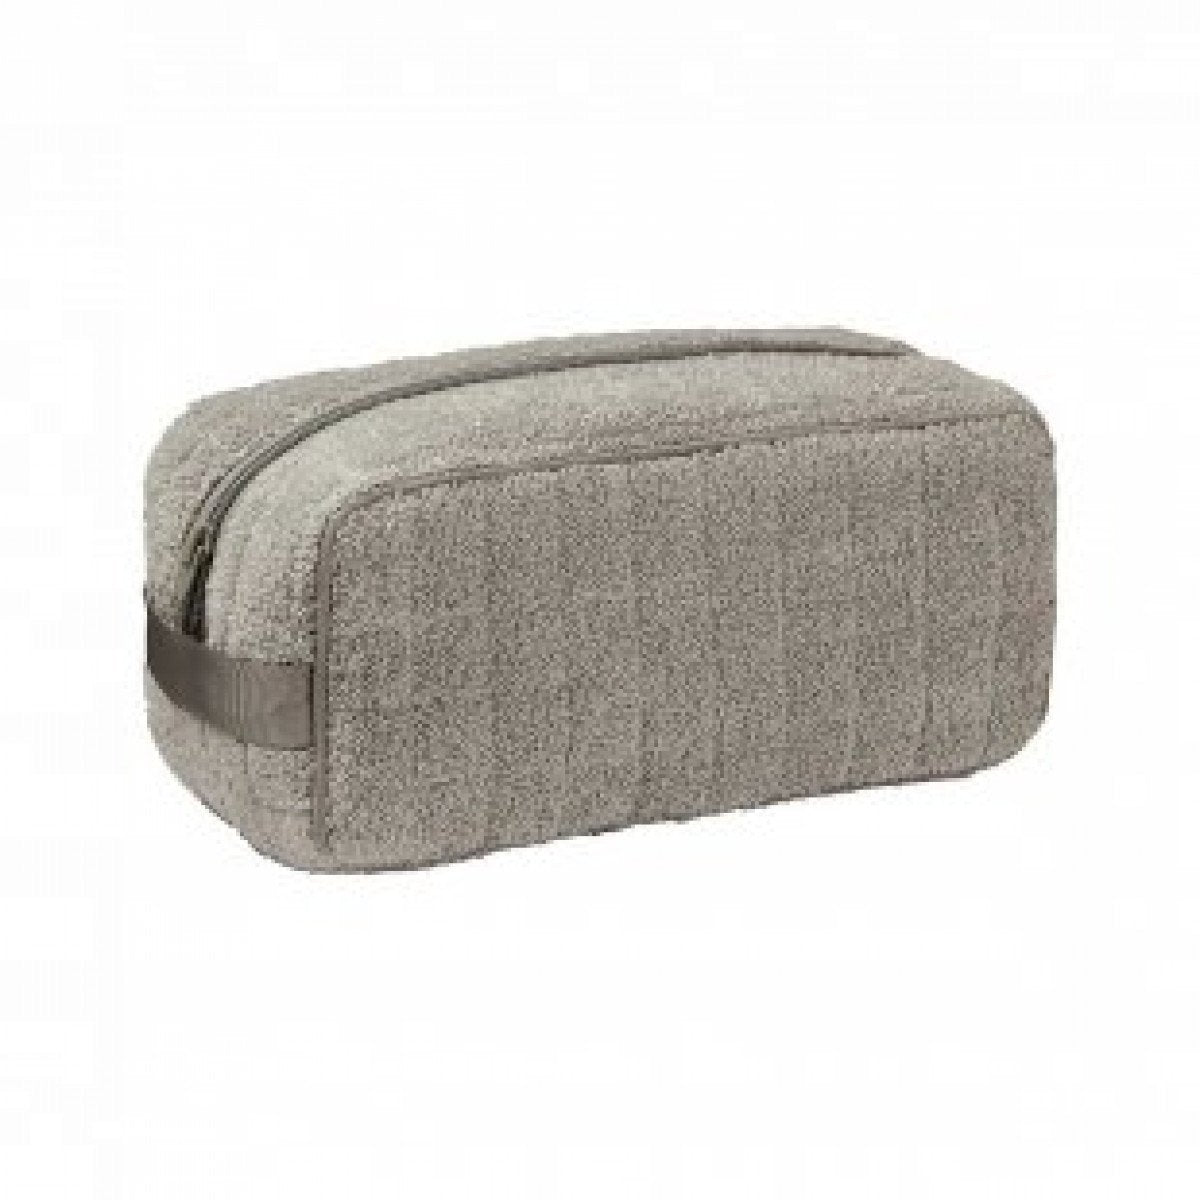 Etoile Pierre Men’s Toiletry Bag by Yves Delorme | Fig Linens